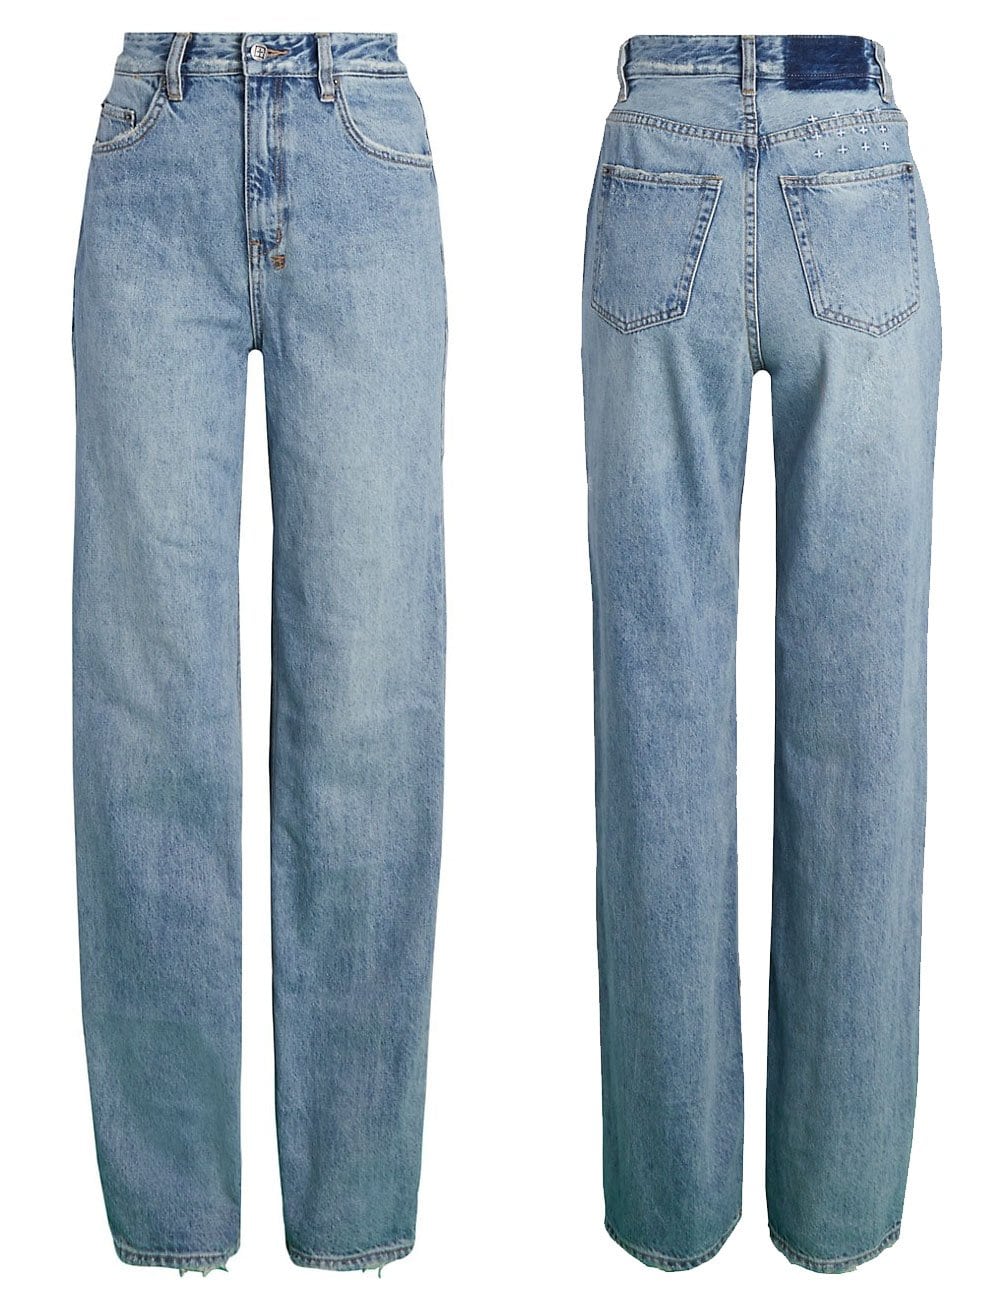 The Playback Karma is a '90s-inspired relaxed straight-leg denim jean with an ultra high waist and five-pocket